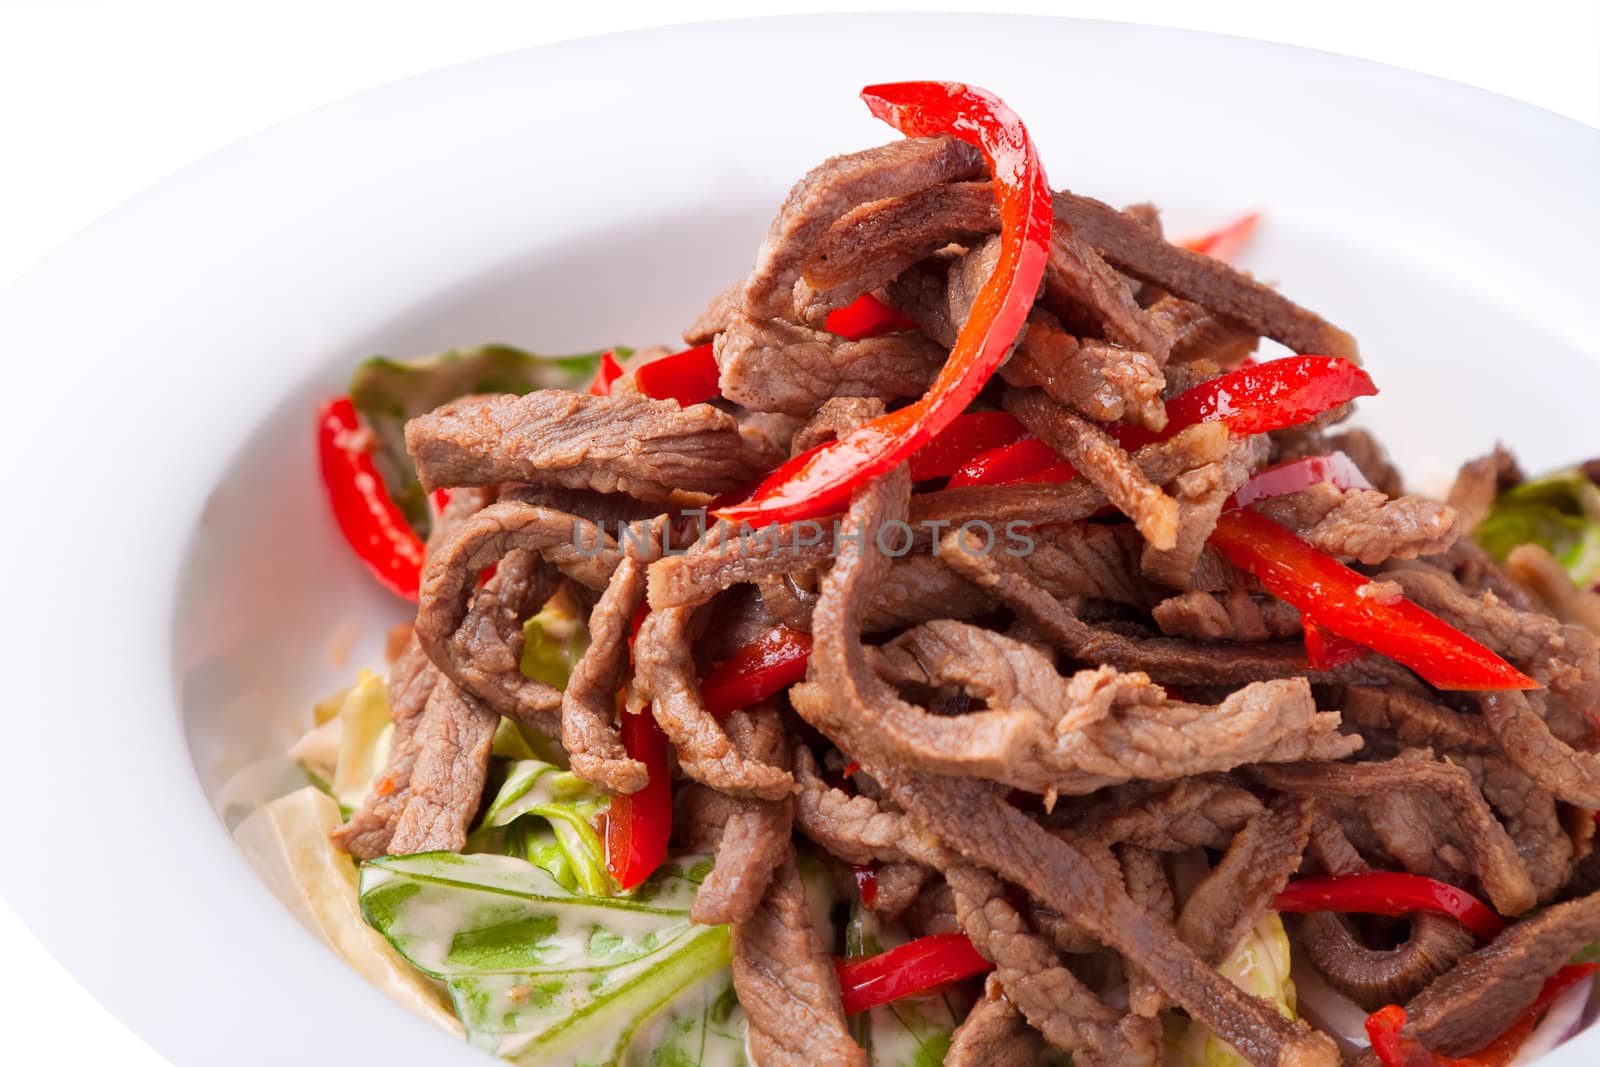 Salad of meat with red pepper on white plate close up